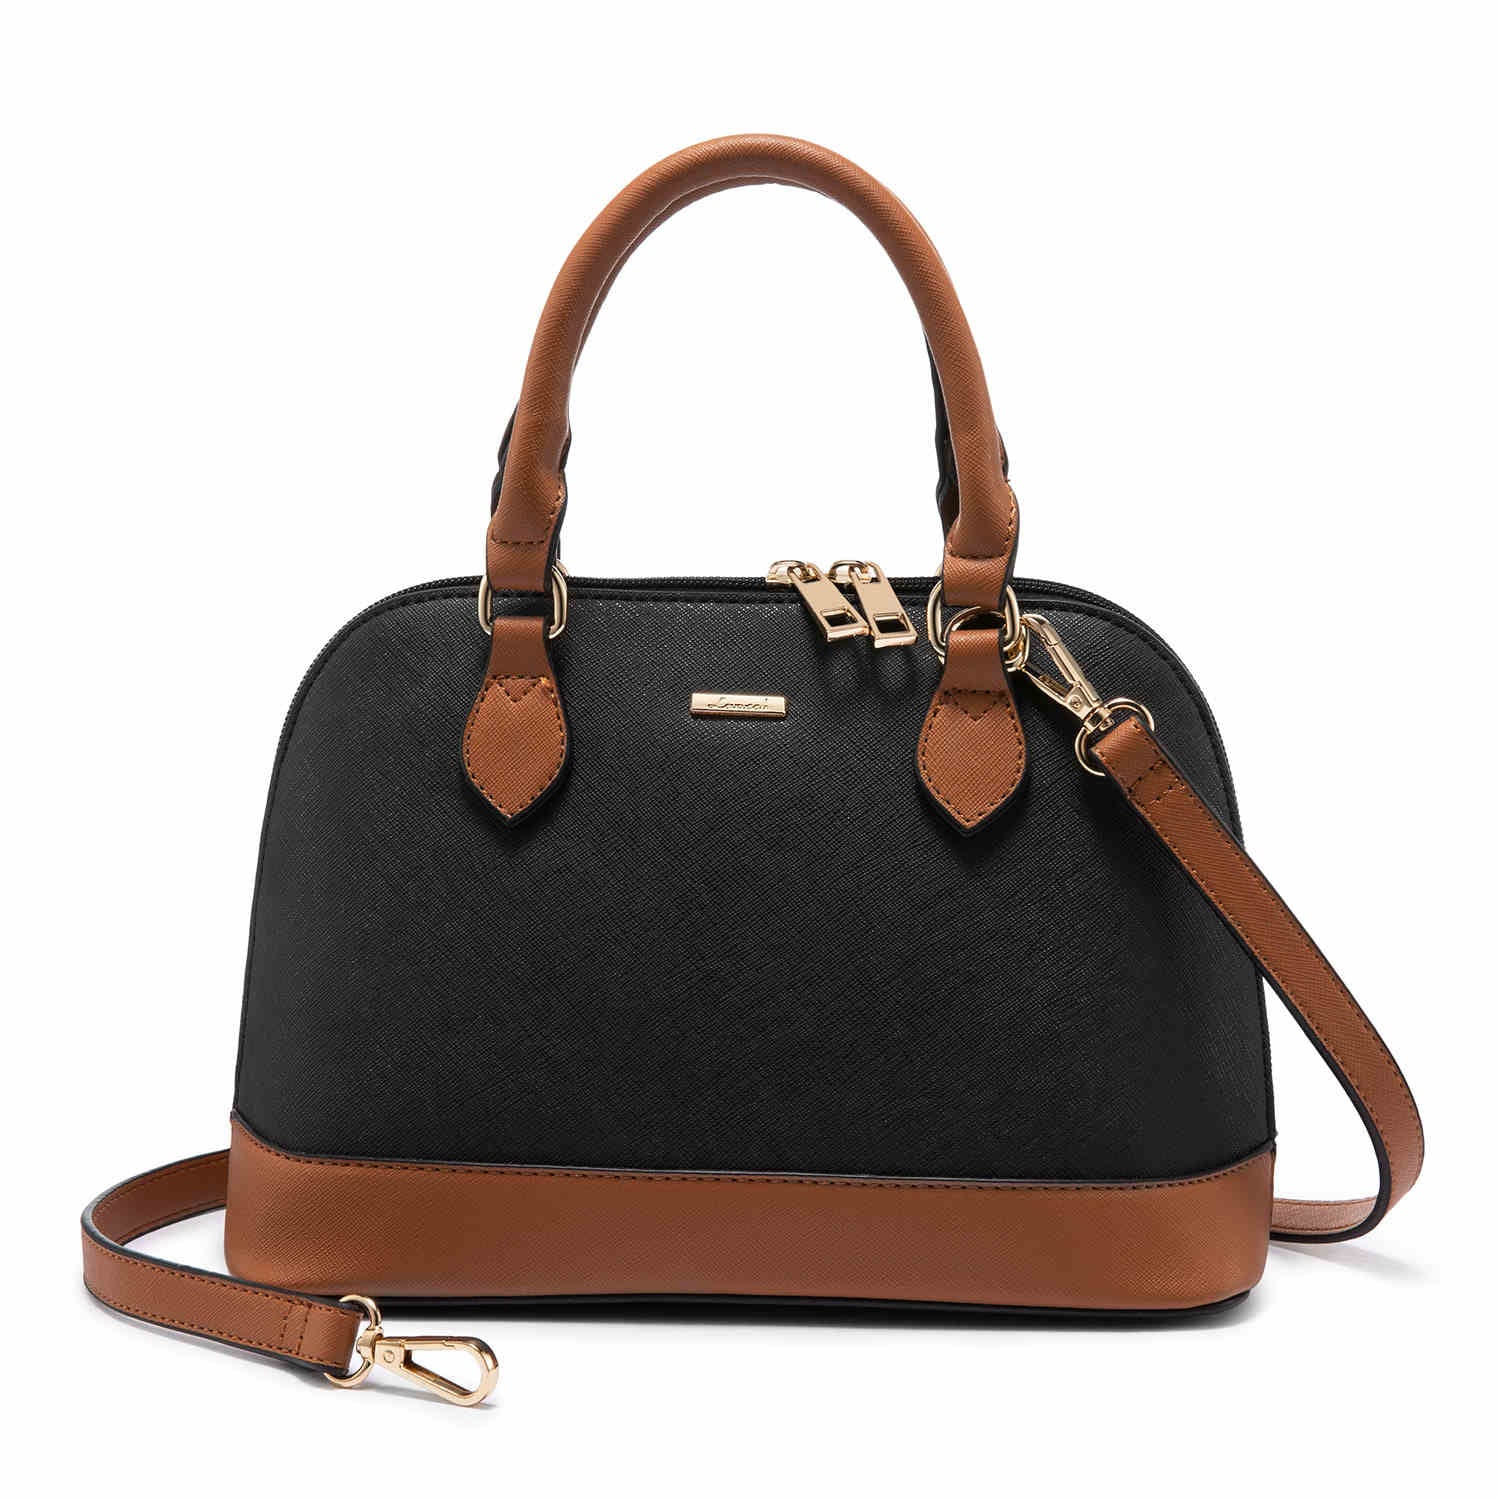 Mid Size Crossbody 35 — Two Girls Beauty Boutique